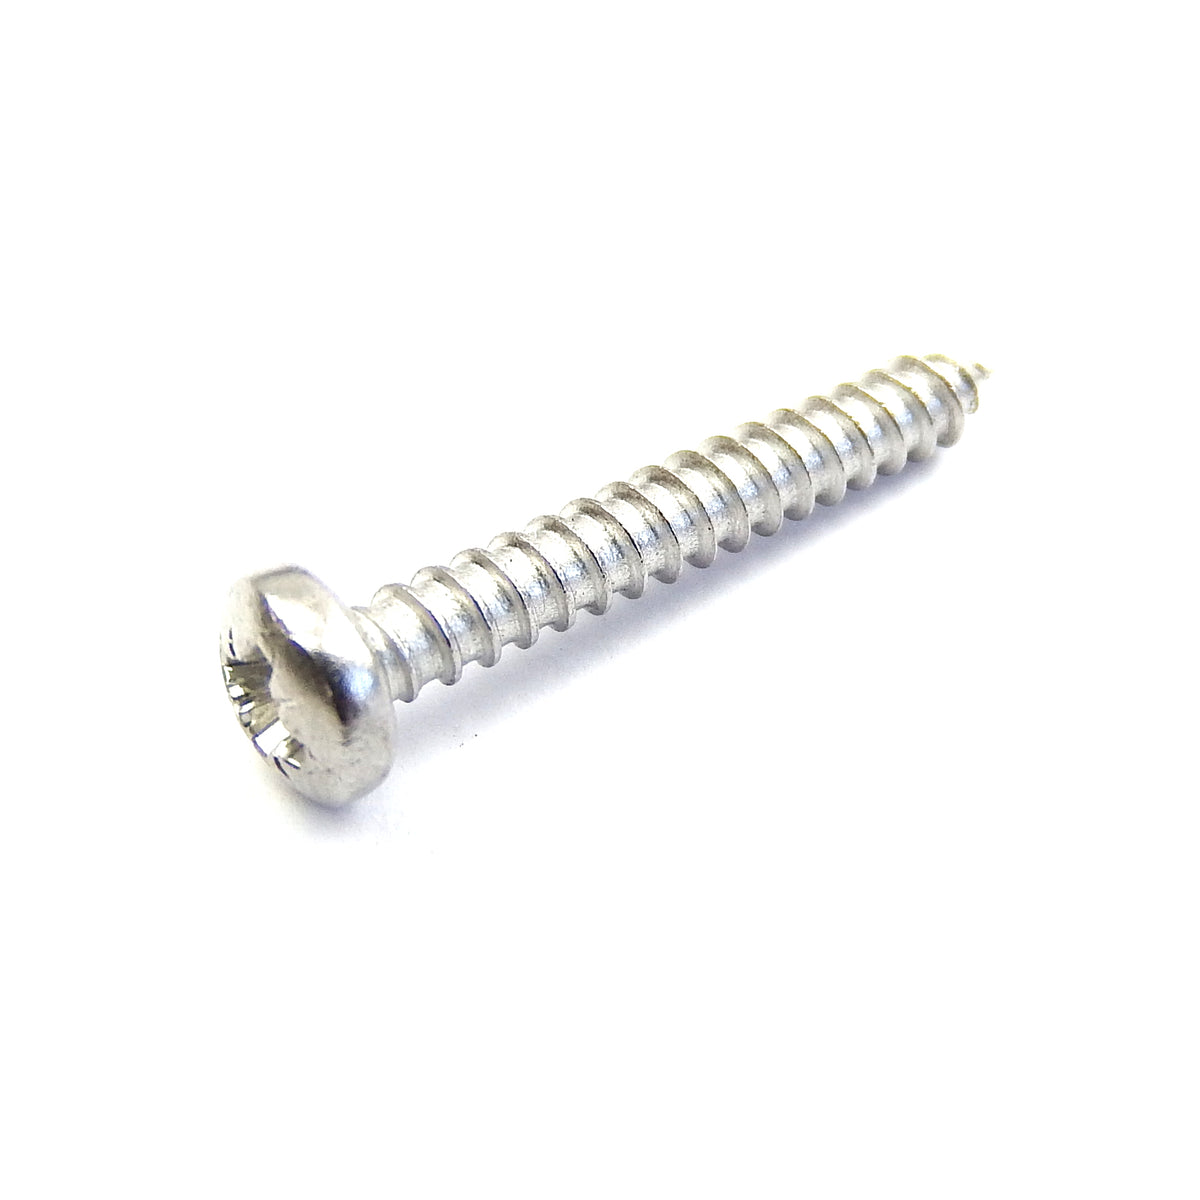 Vespa Headset Top Screw for T5 Mark 1 in Stainless